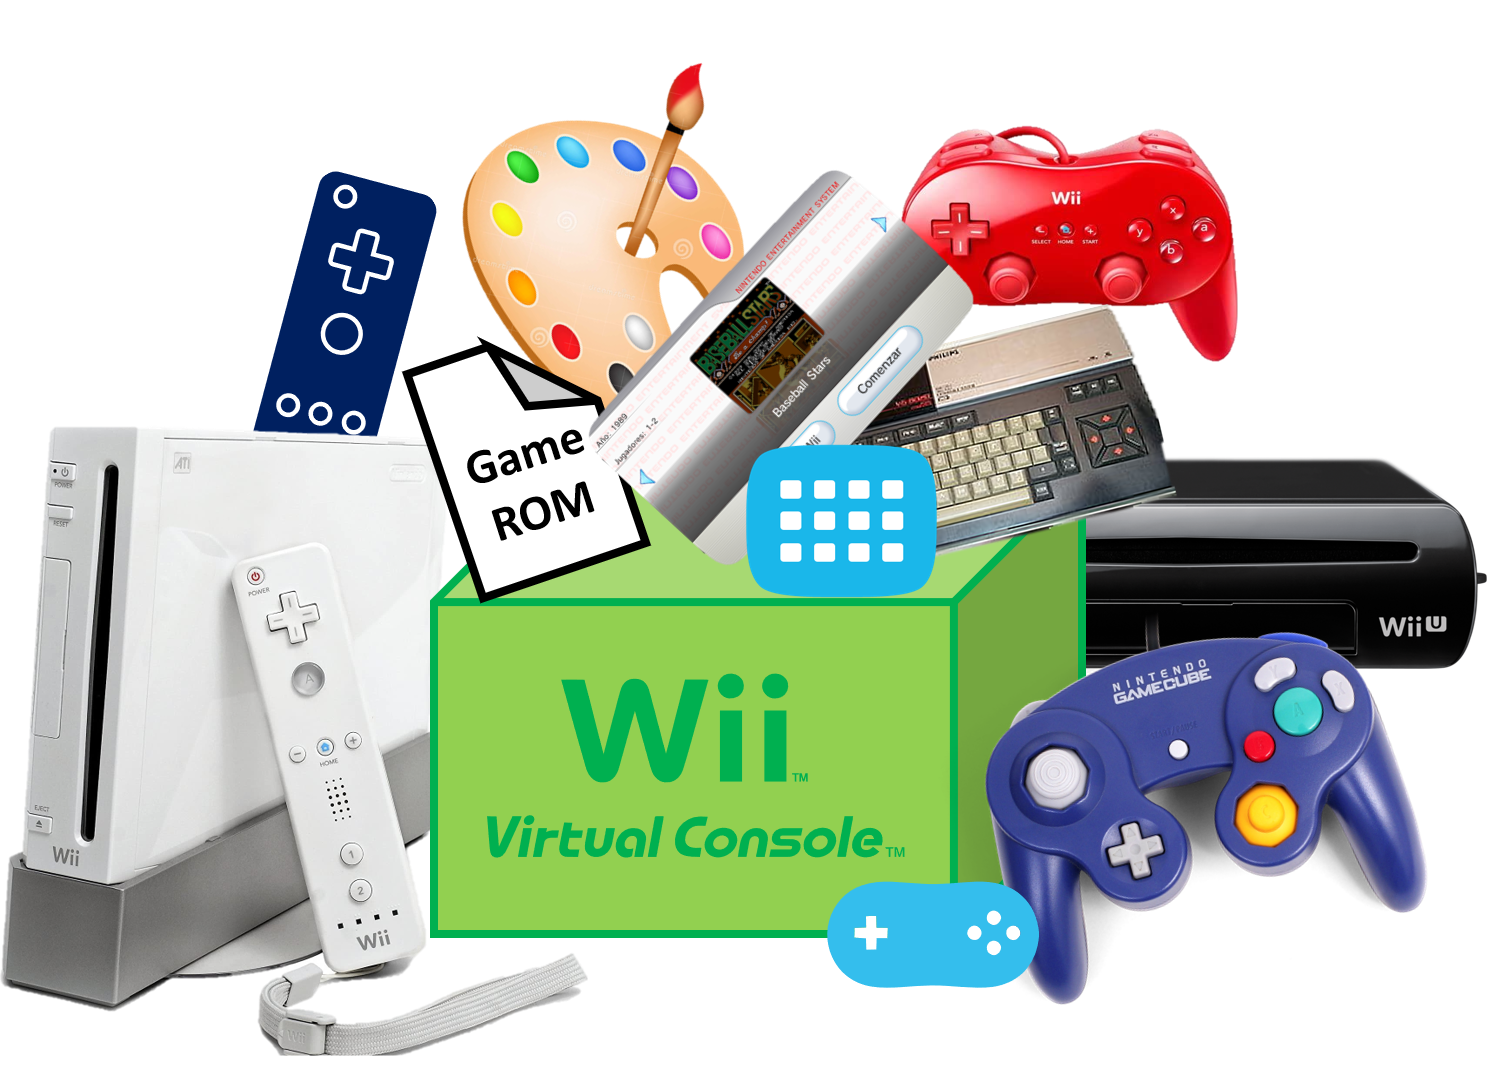 RELEASE] saulfabreg All-in-One Wii Virtual Console iNJECTiNG Tools (AIO Wii  VC iNJECT Tools) | GBAtemp.net - The Independent Video Game Community